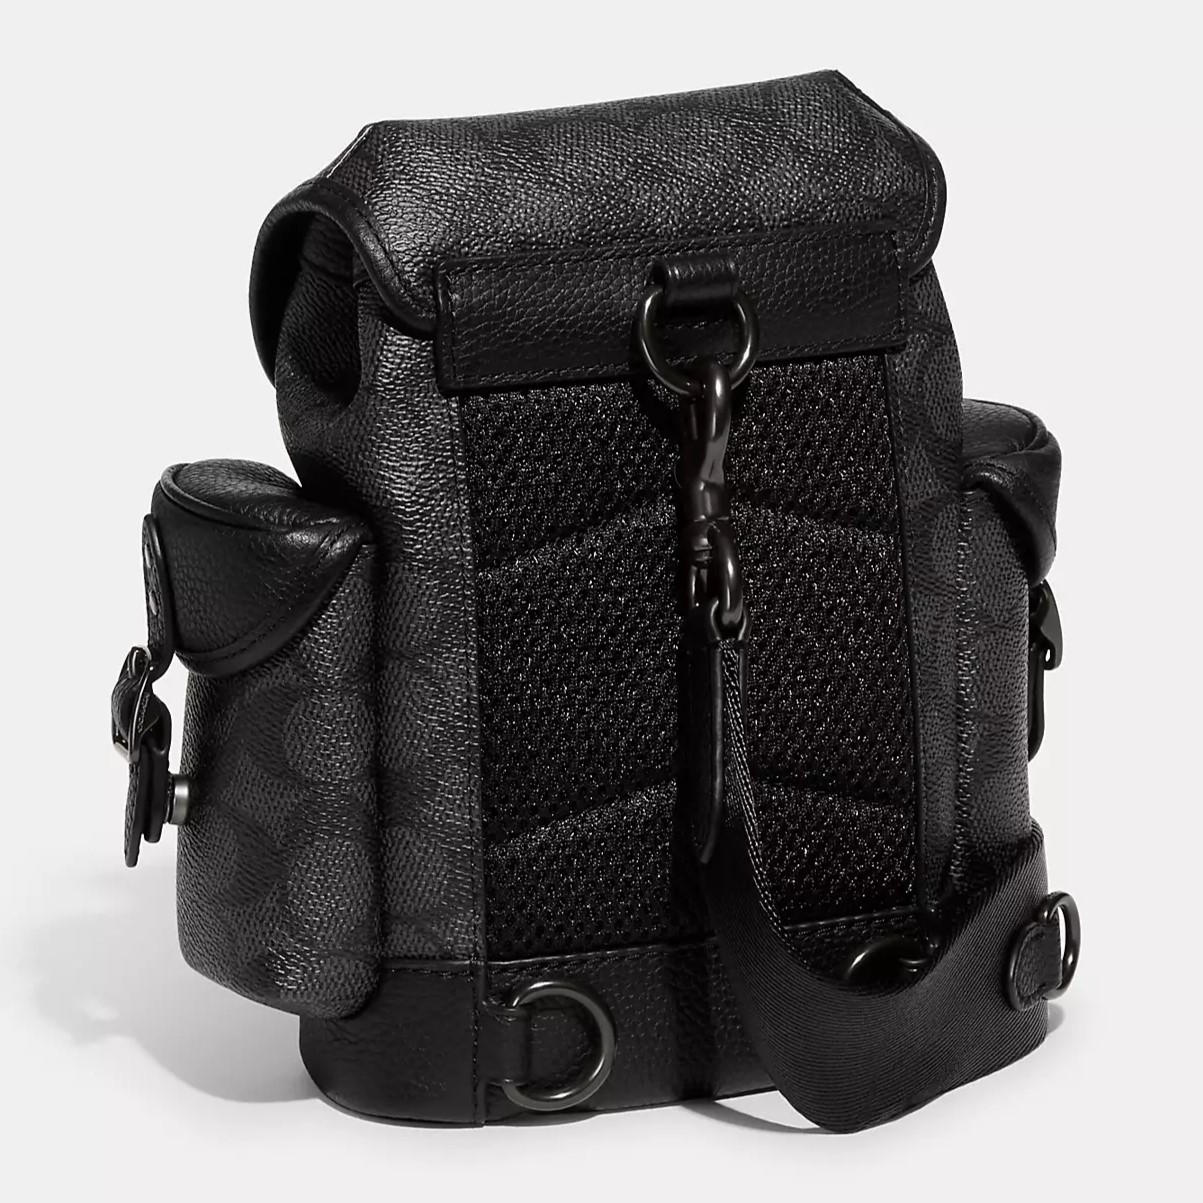 BALO COACH NAM HITCH BACKPACK 13 IN SIGNATURE COATED CANVAS AND SOFT POLISHED PEBBLE LEATHER CE506 3